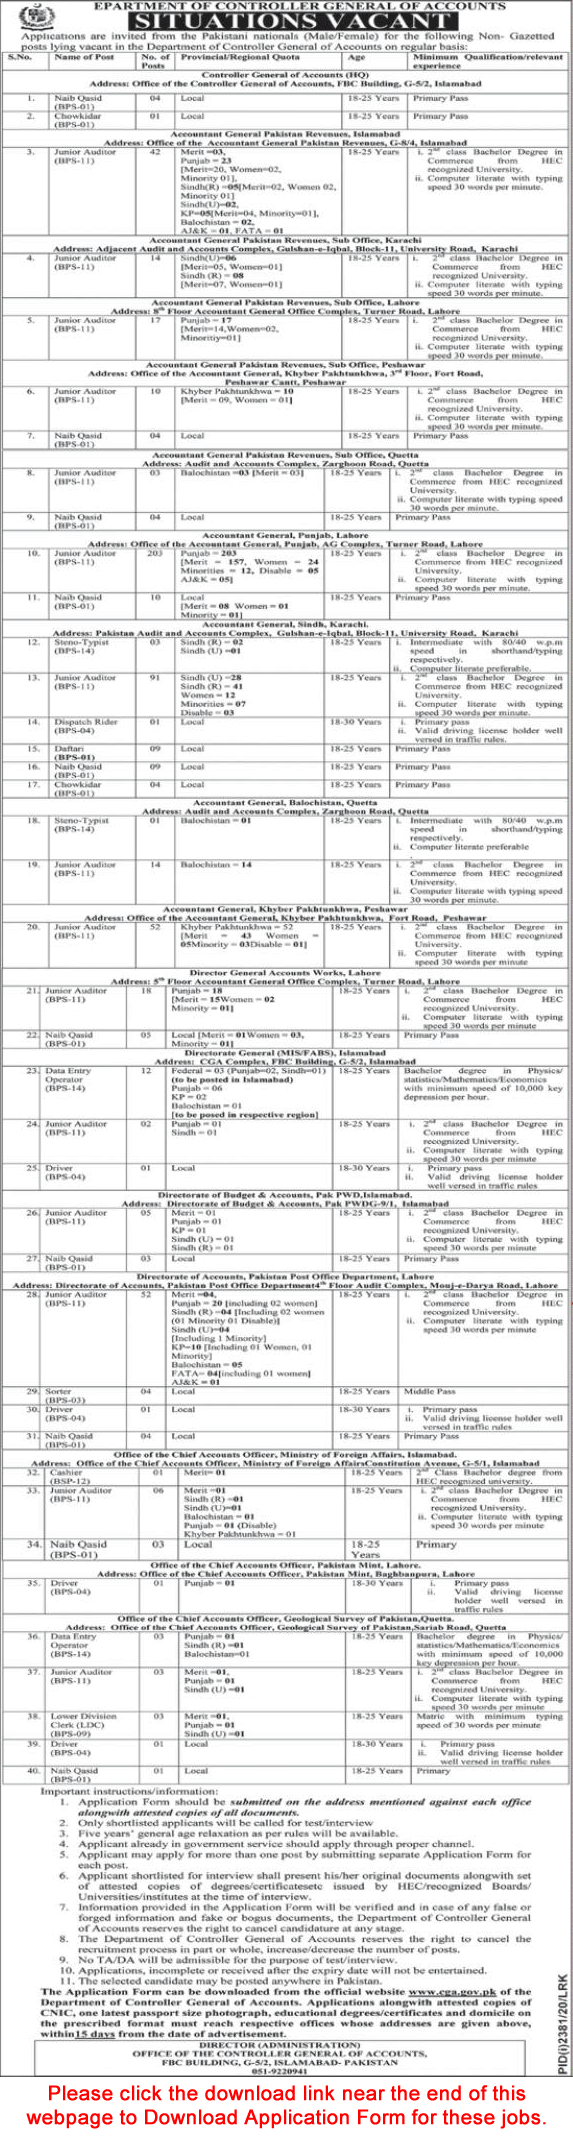 Controller General of Accounts Pakistan Jobs 2020 November Application Form Junior Auditors & Others Latest